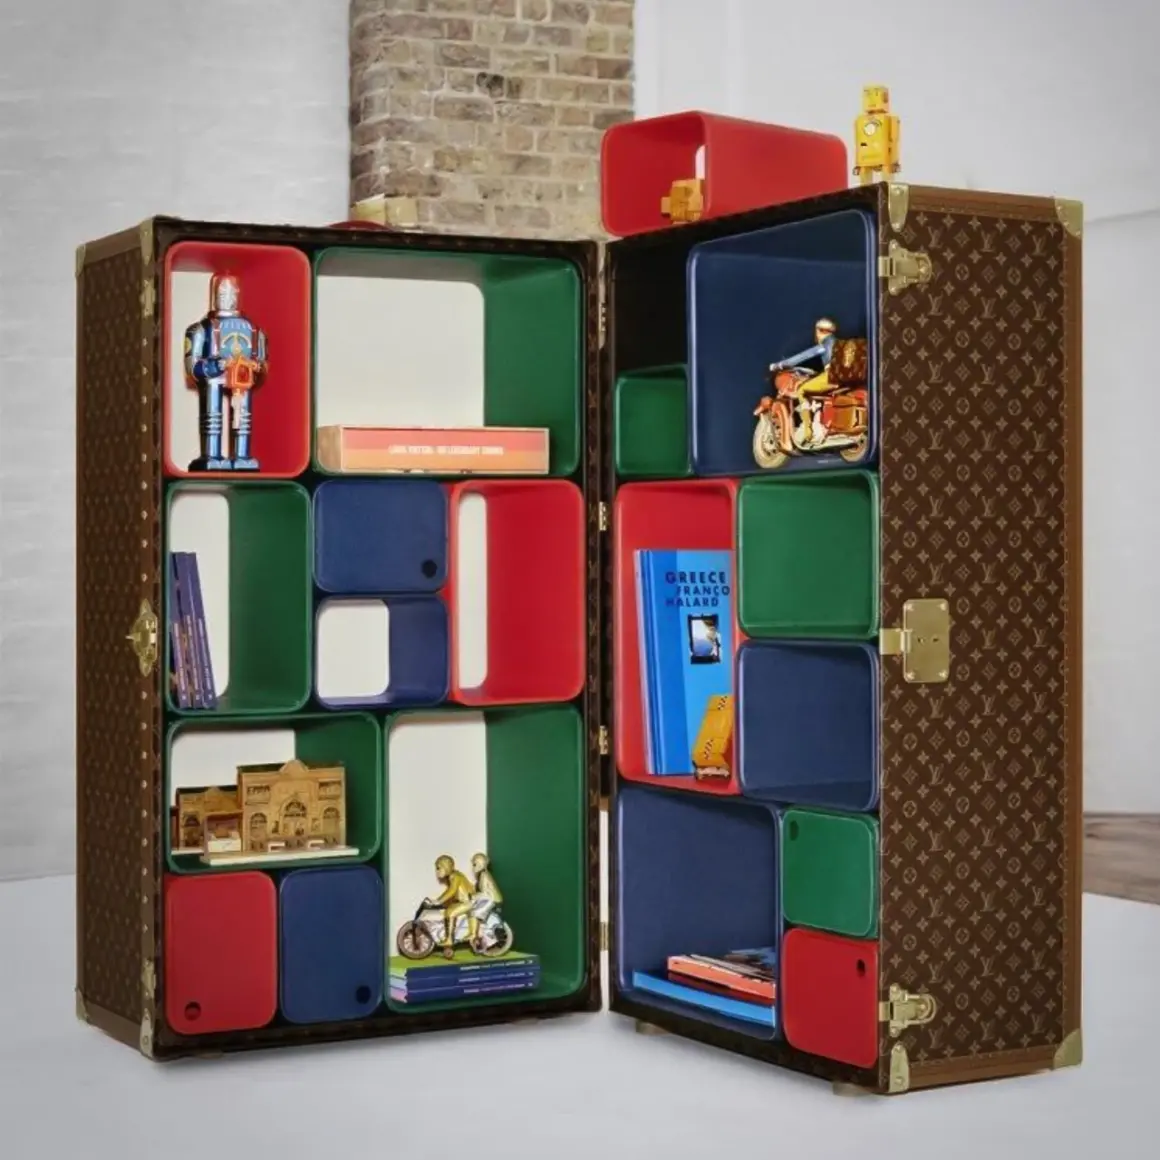 Marc Newson Redesigns The Iconic Louis Vuitton Travel Trunk – The